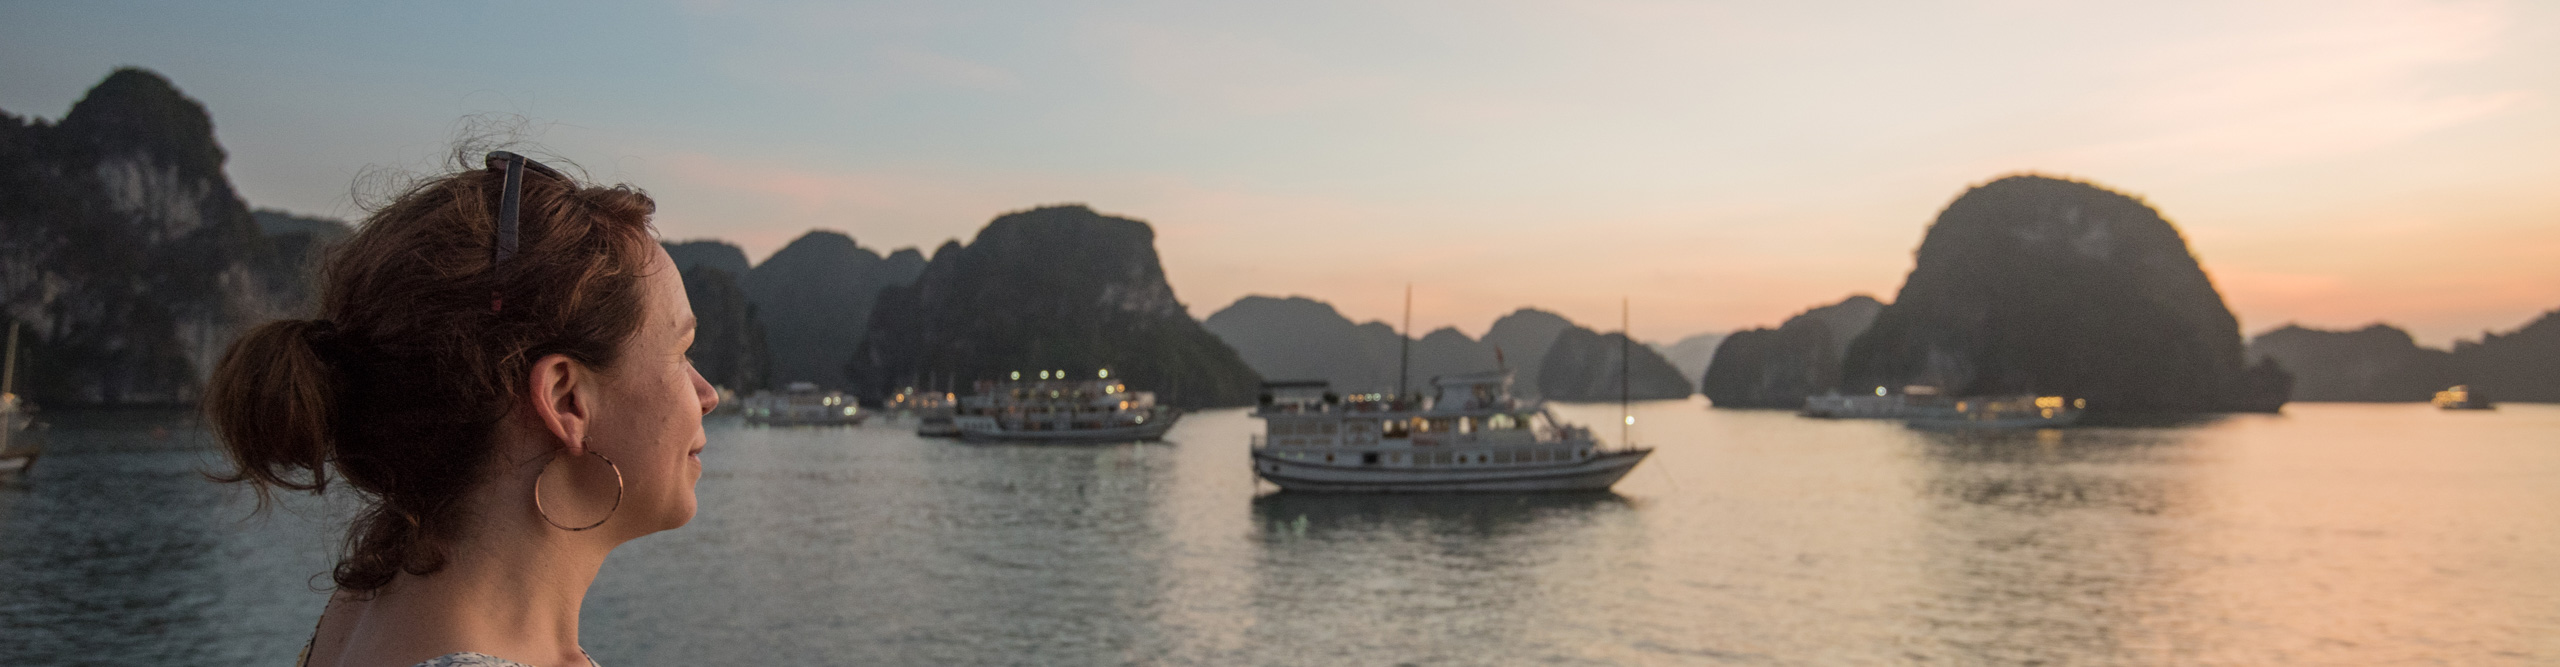 Woman looking at sunset over the islands and boats of Halong bay, Vietnam